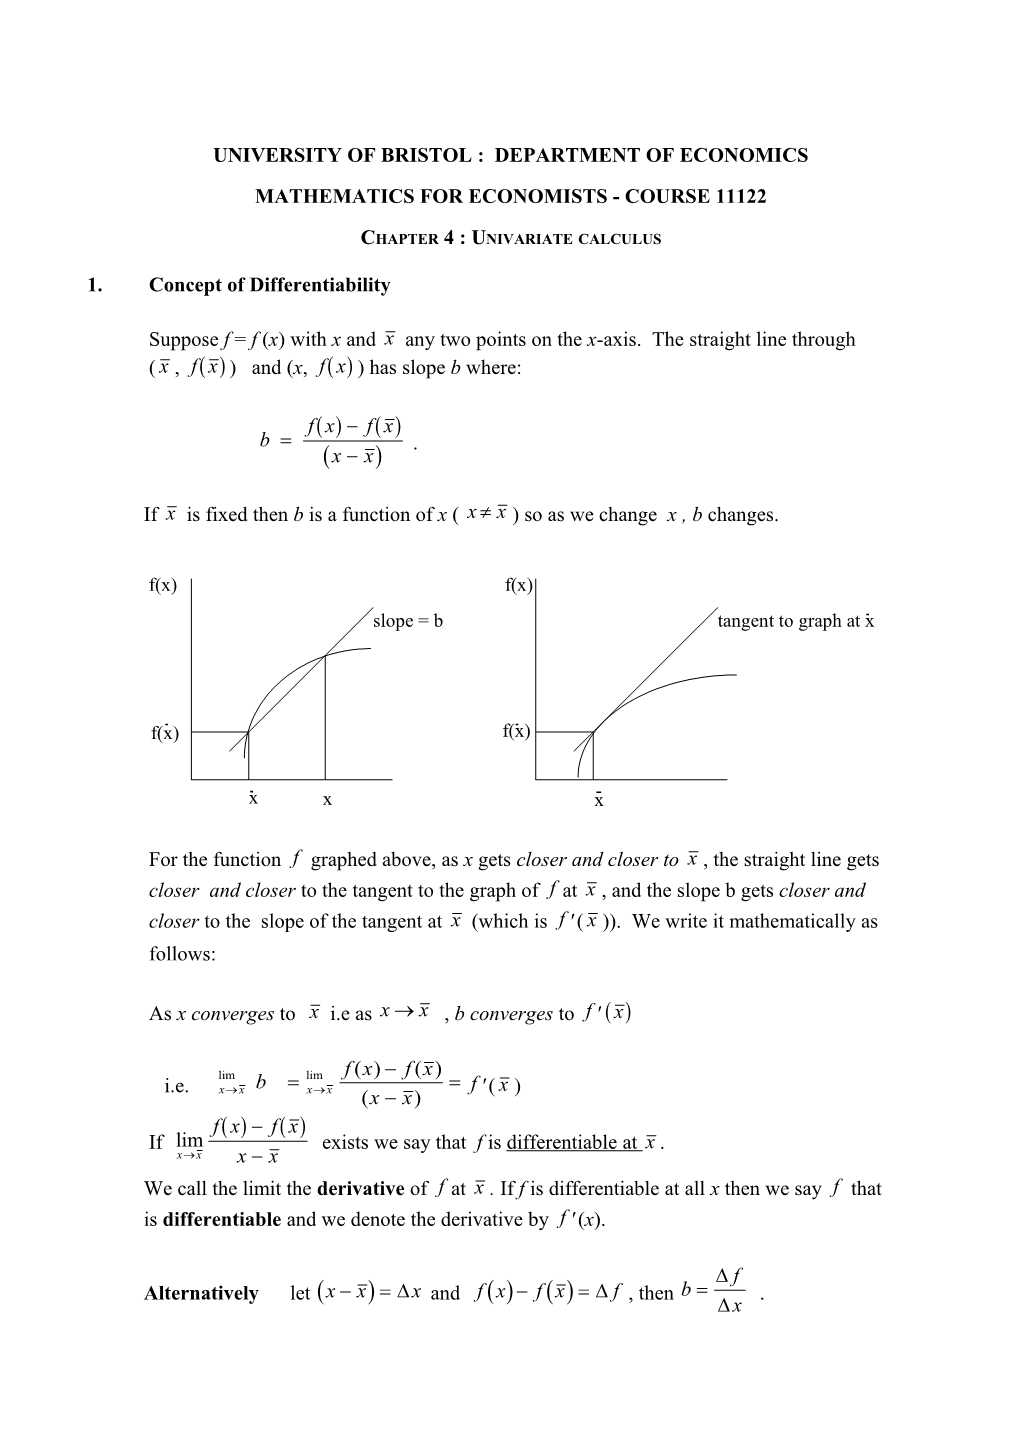 Chapter 5: Univariable Calculus